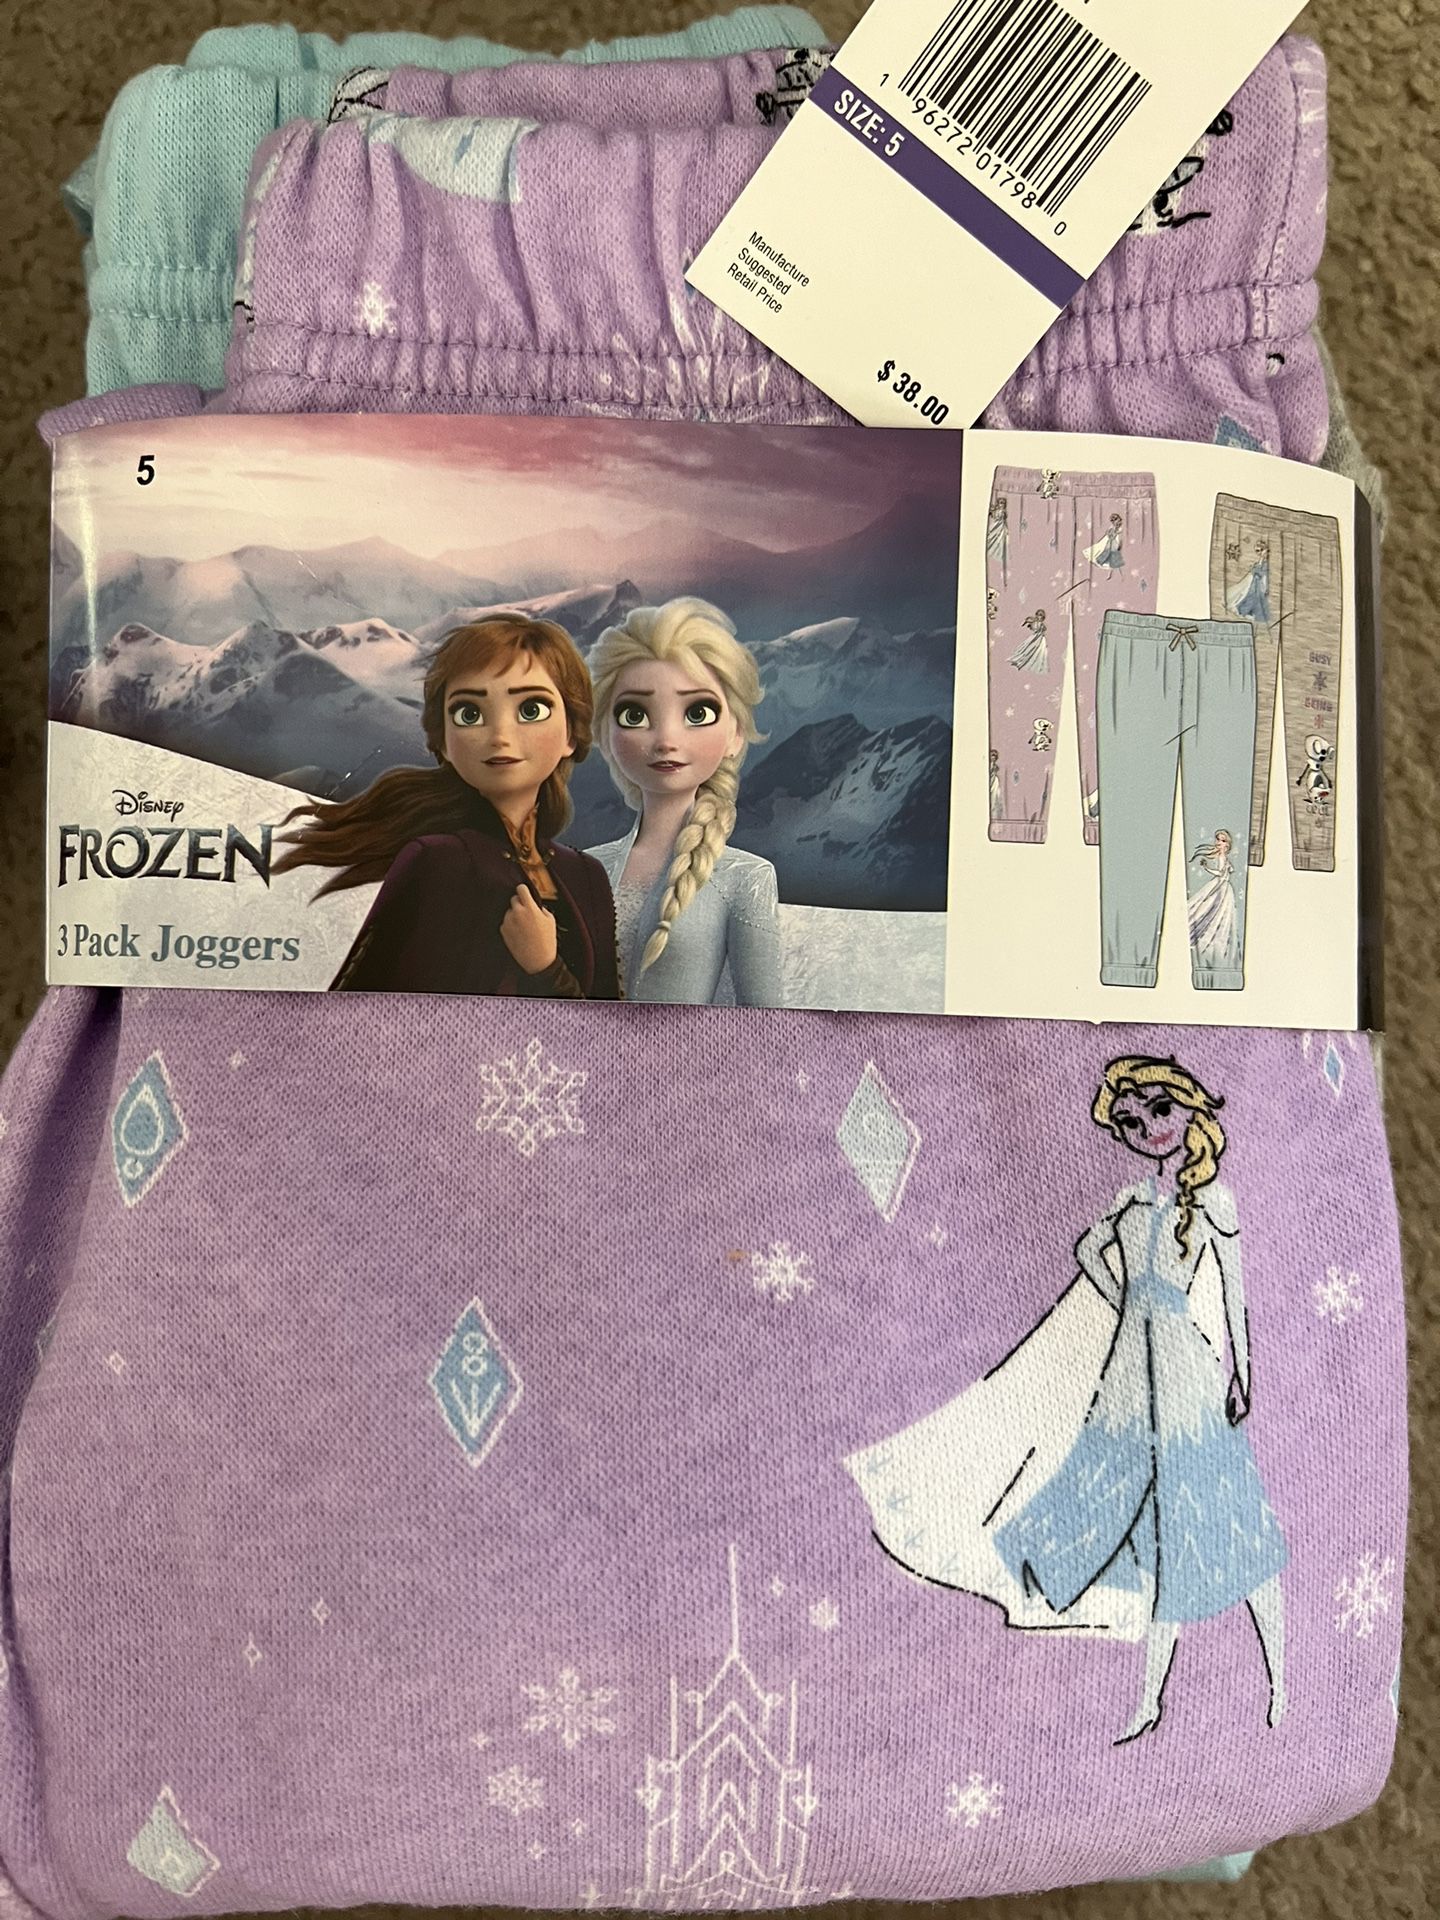 DISNEY FROZEN 3 pack joggers size ( 5 , 6 and 6x)